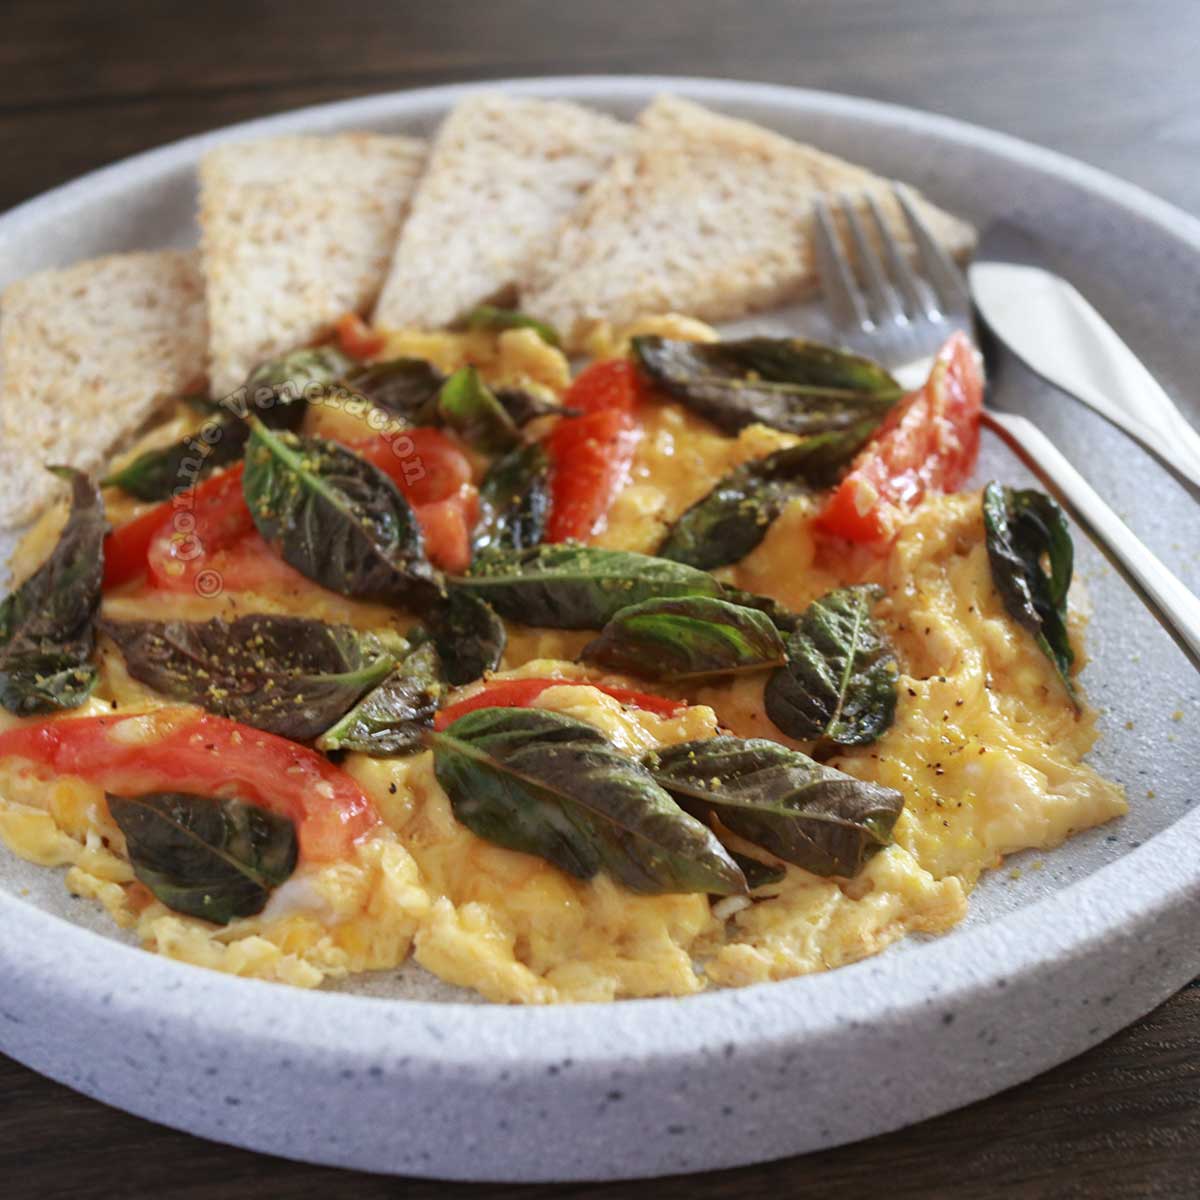 scrambled eggs with tomato, basil and cheese, served with bread on the side